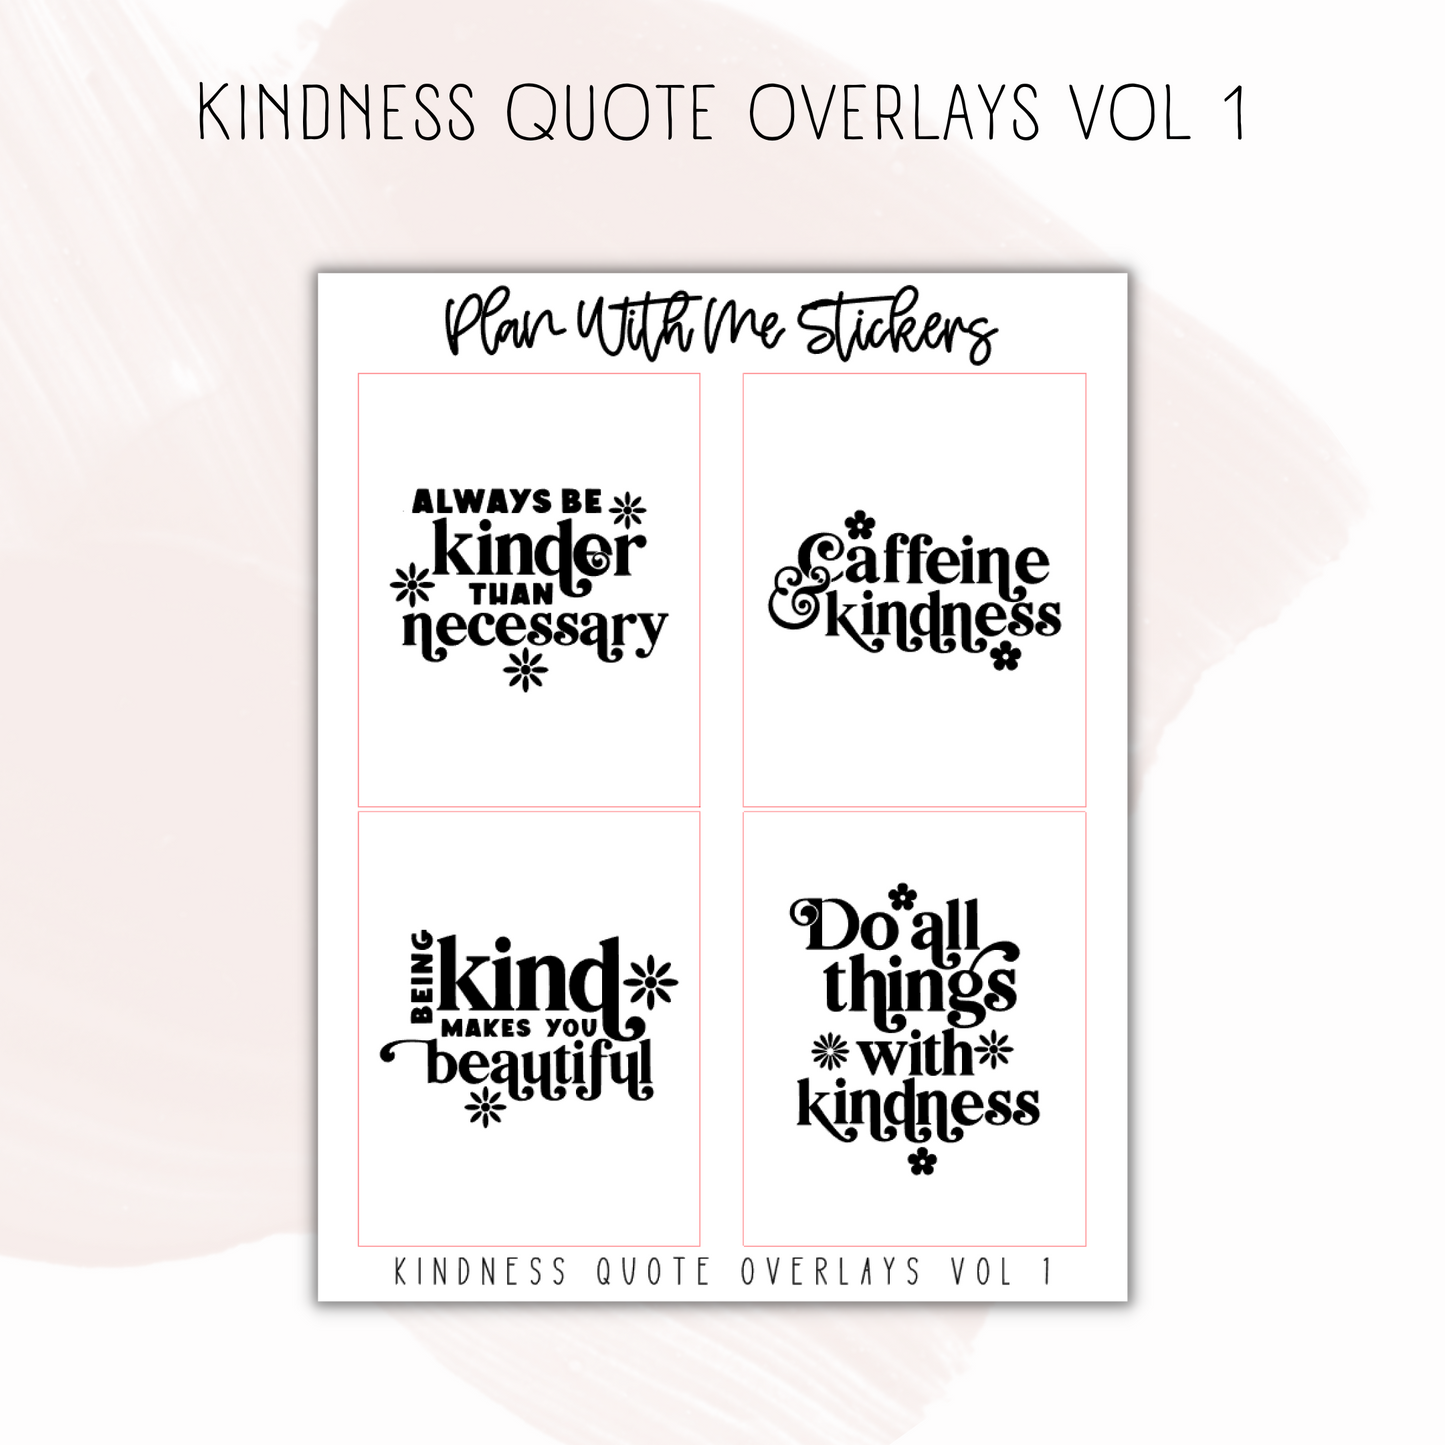 Kindness Quote Overlays Vol 1